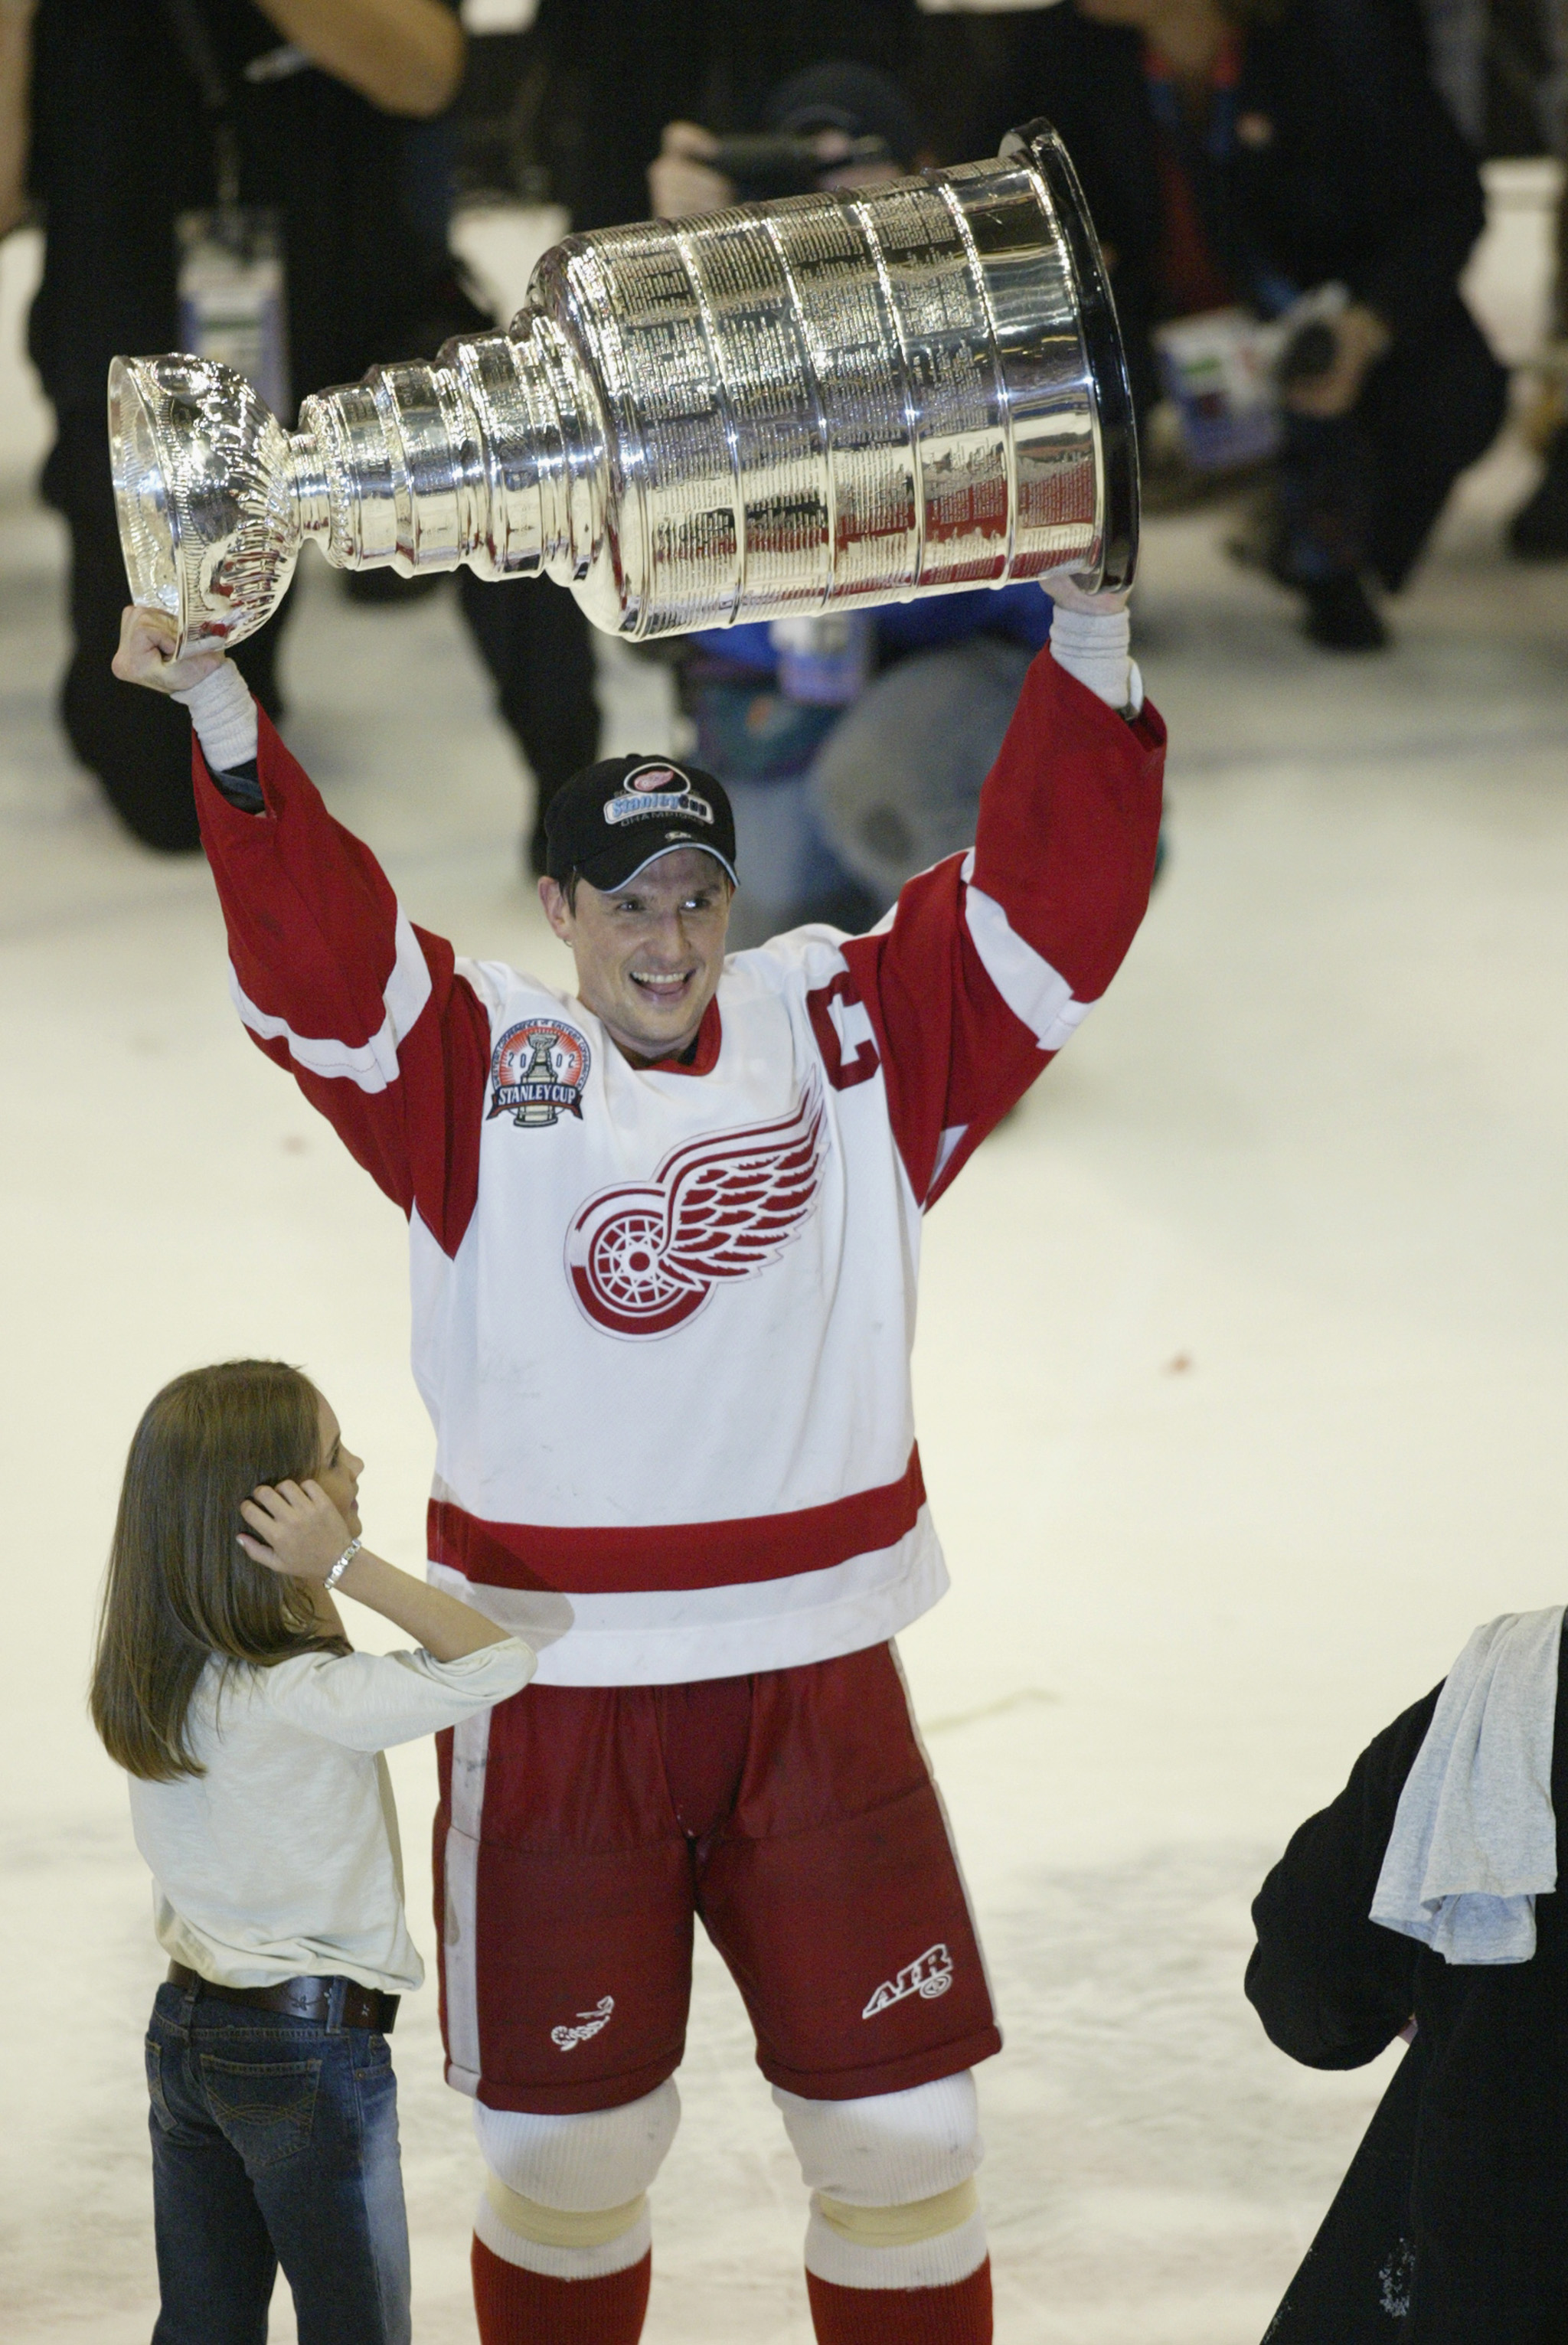 Detroit Red Wings  History, Stanley Cups, & Notable Players